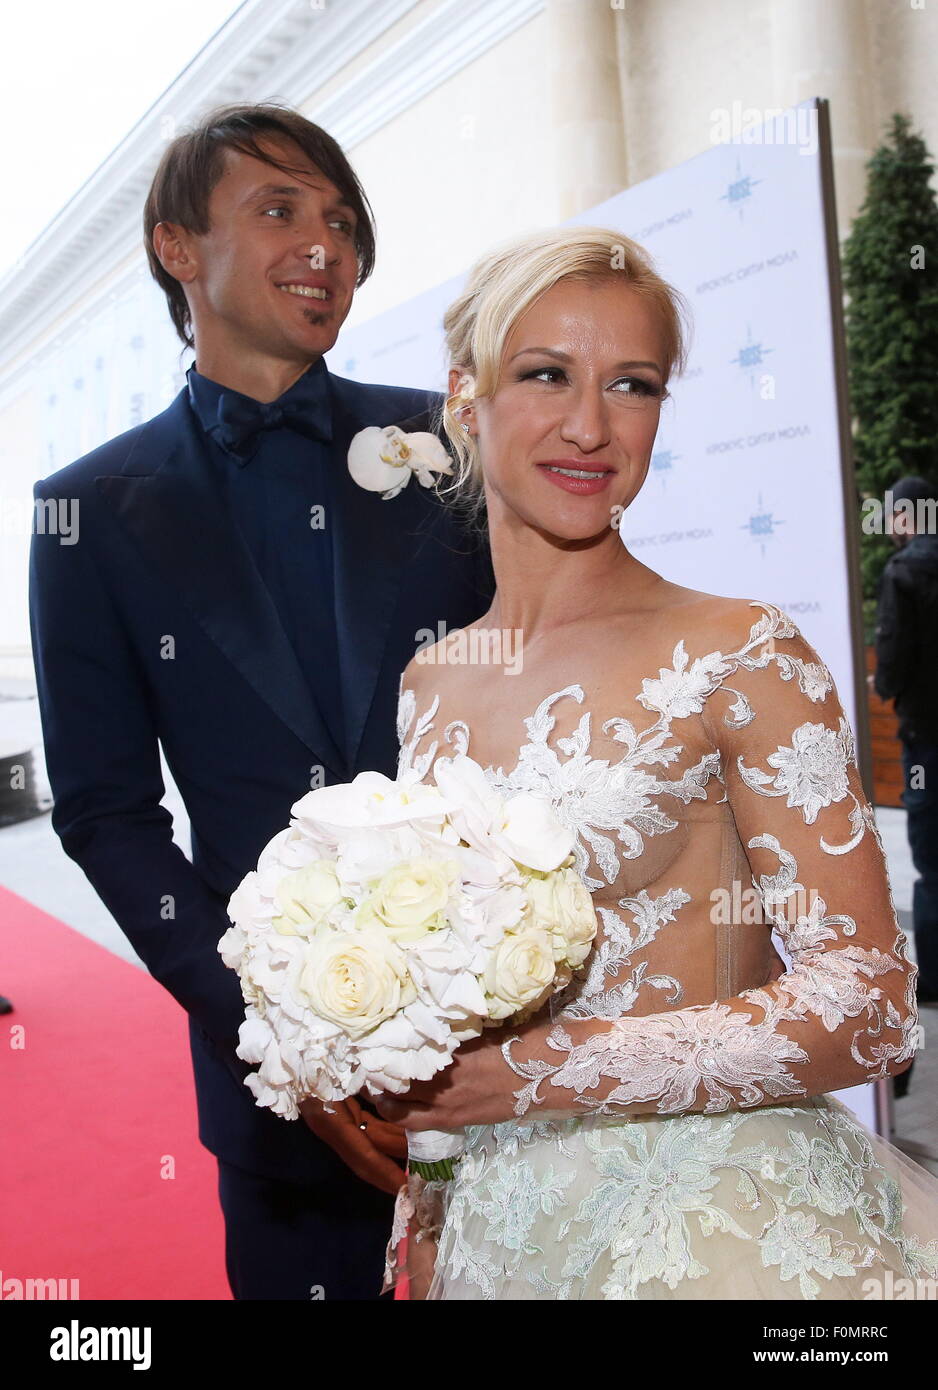 Moscow, Russia. 18th Aug, 2015. Two-time Olympic figure skating champions Maxim Trankov (L) and Tatyana Volosozhar during their wedding at the Rose Bar restaurant. Credit:  Vyacheslav Prokofyev/TASS/Alamy Live News Stock Photo